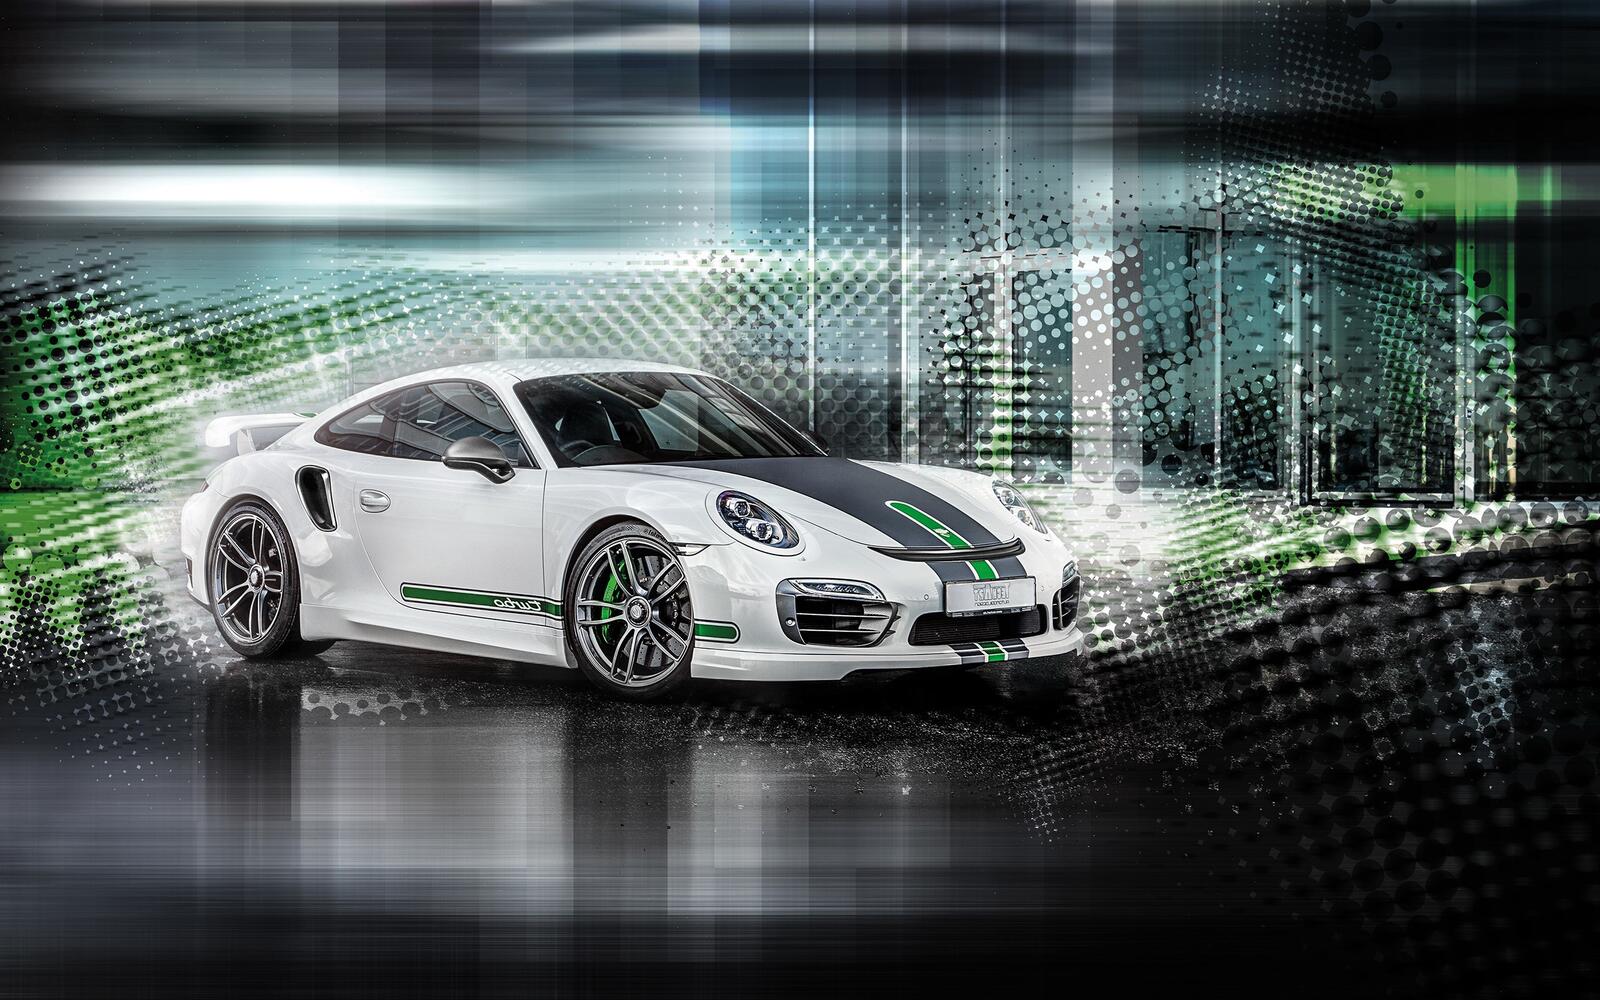 Free photo Picture of Porsche 911 on an abstract background